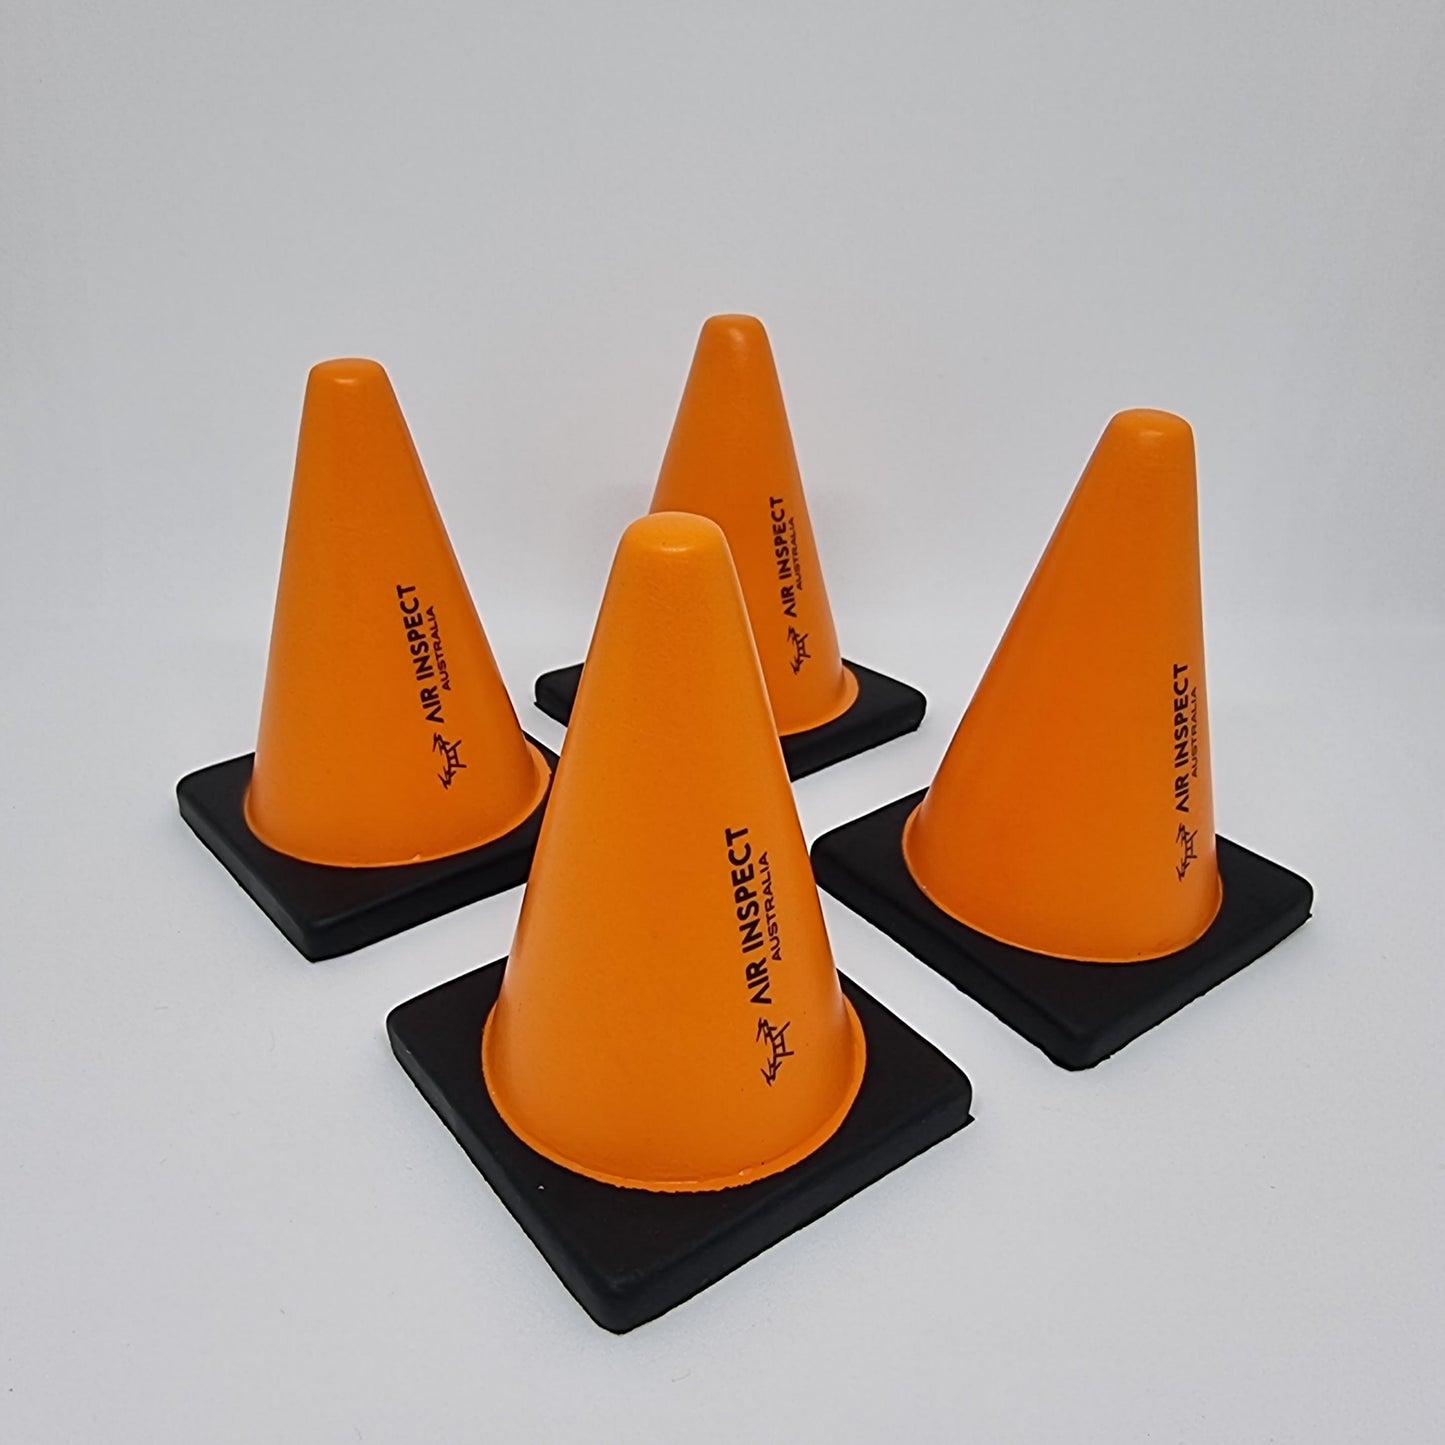 Stress Shaped Traffic Cone- 4 Pack